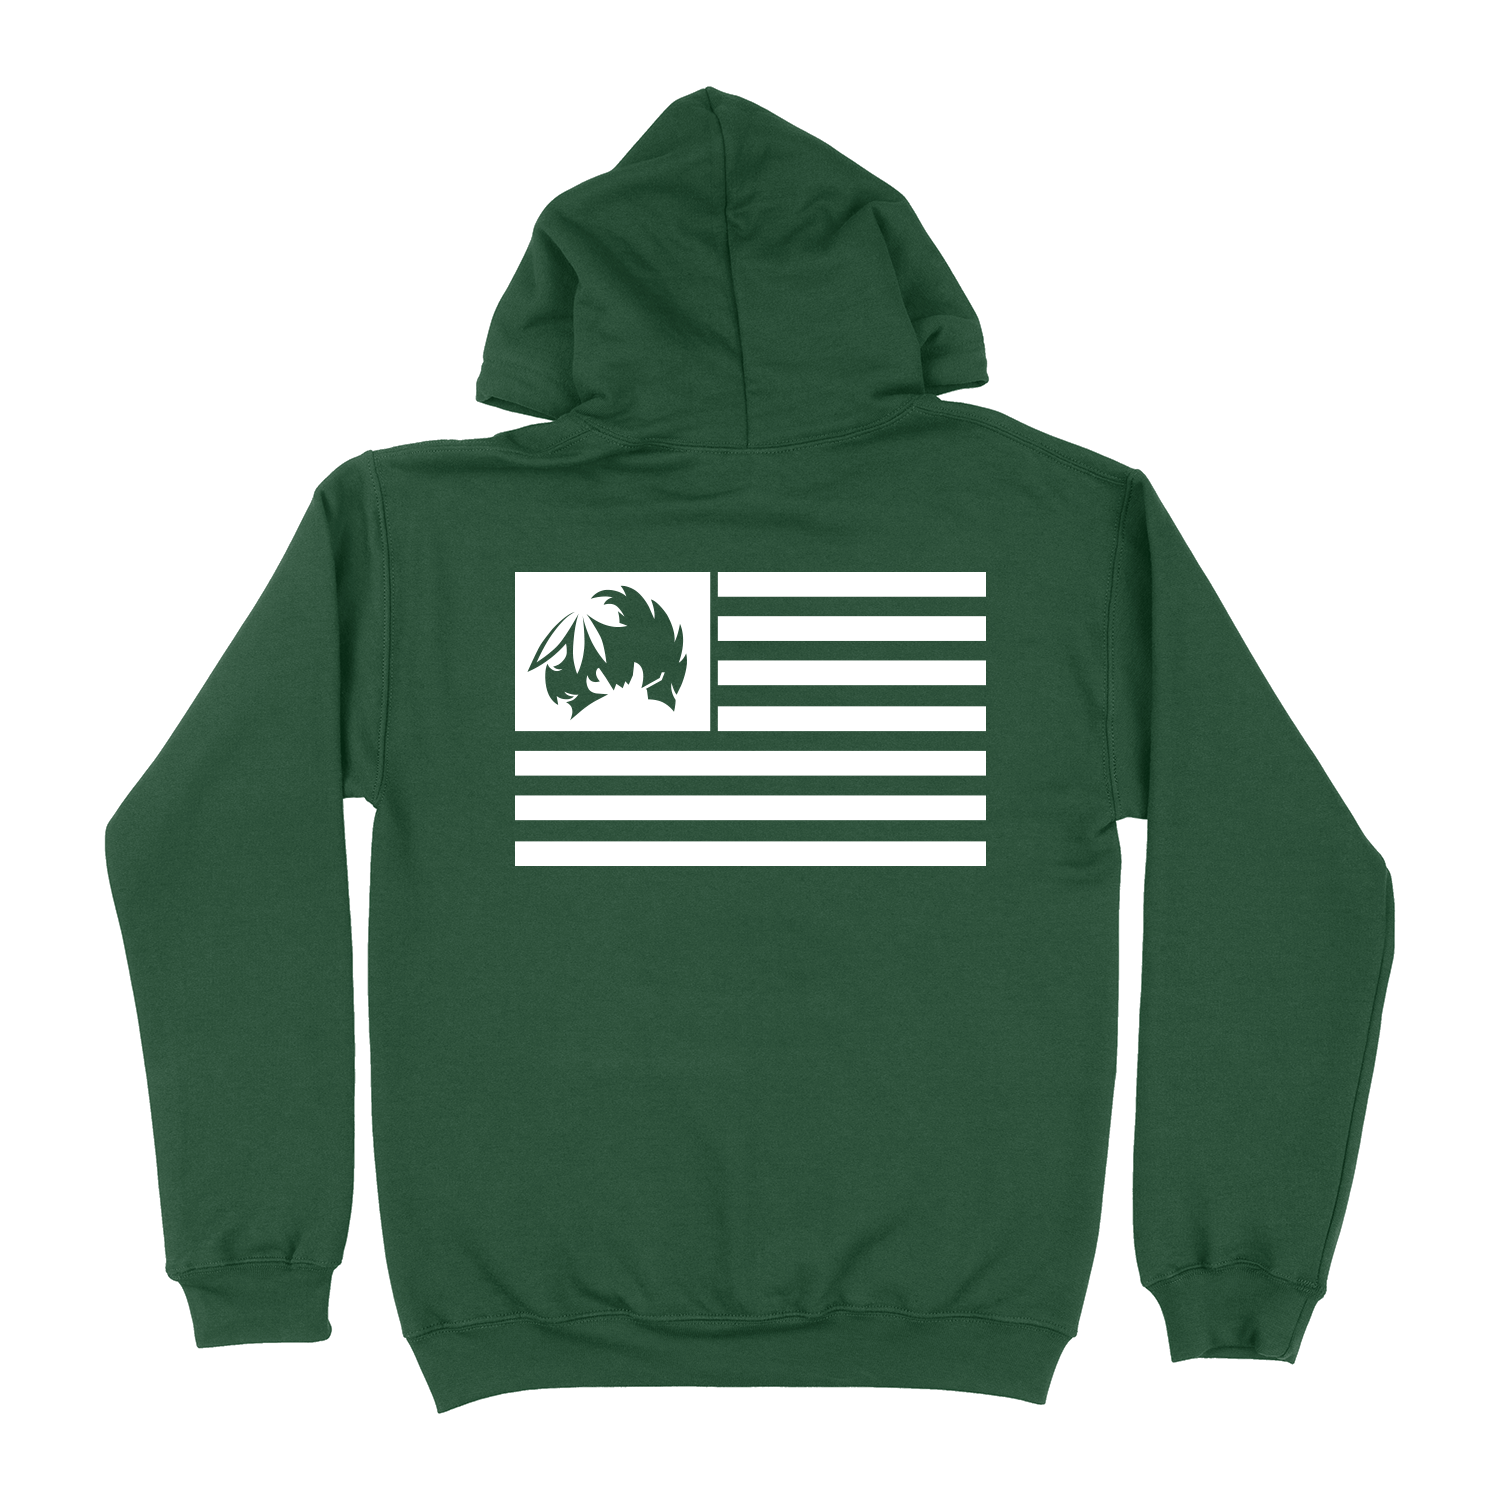 TICAL New York Pullover Hoodie Forest and White